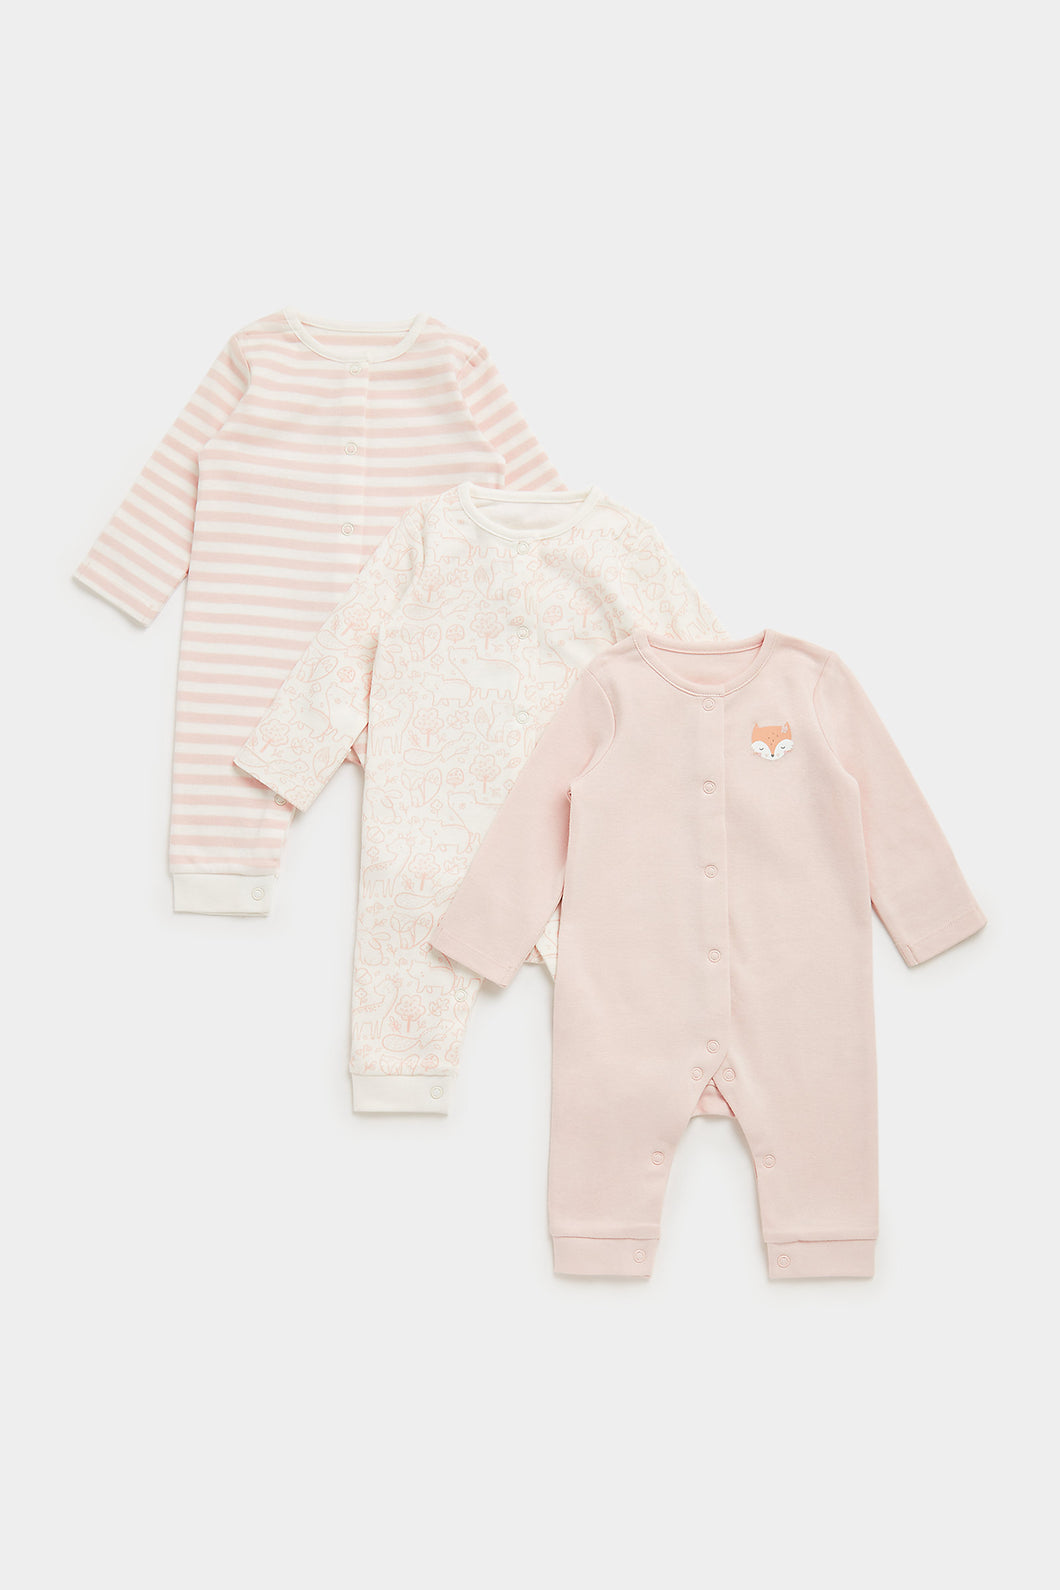 Mothercare Woodland Footless Baby Sleepsuits - 3 Pack